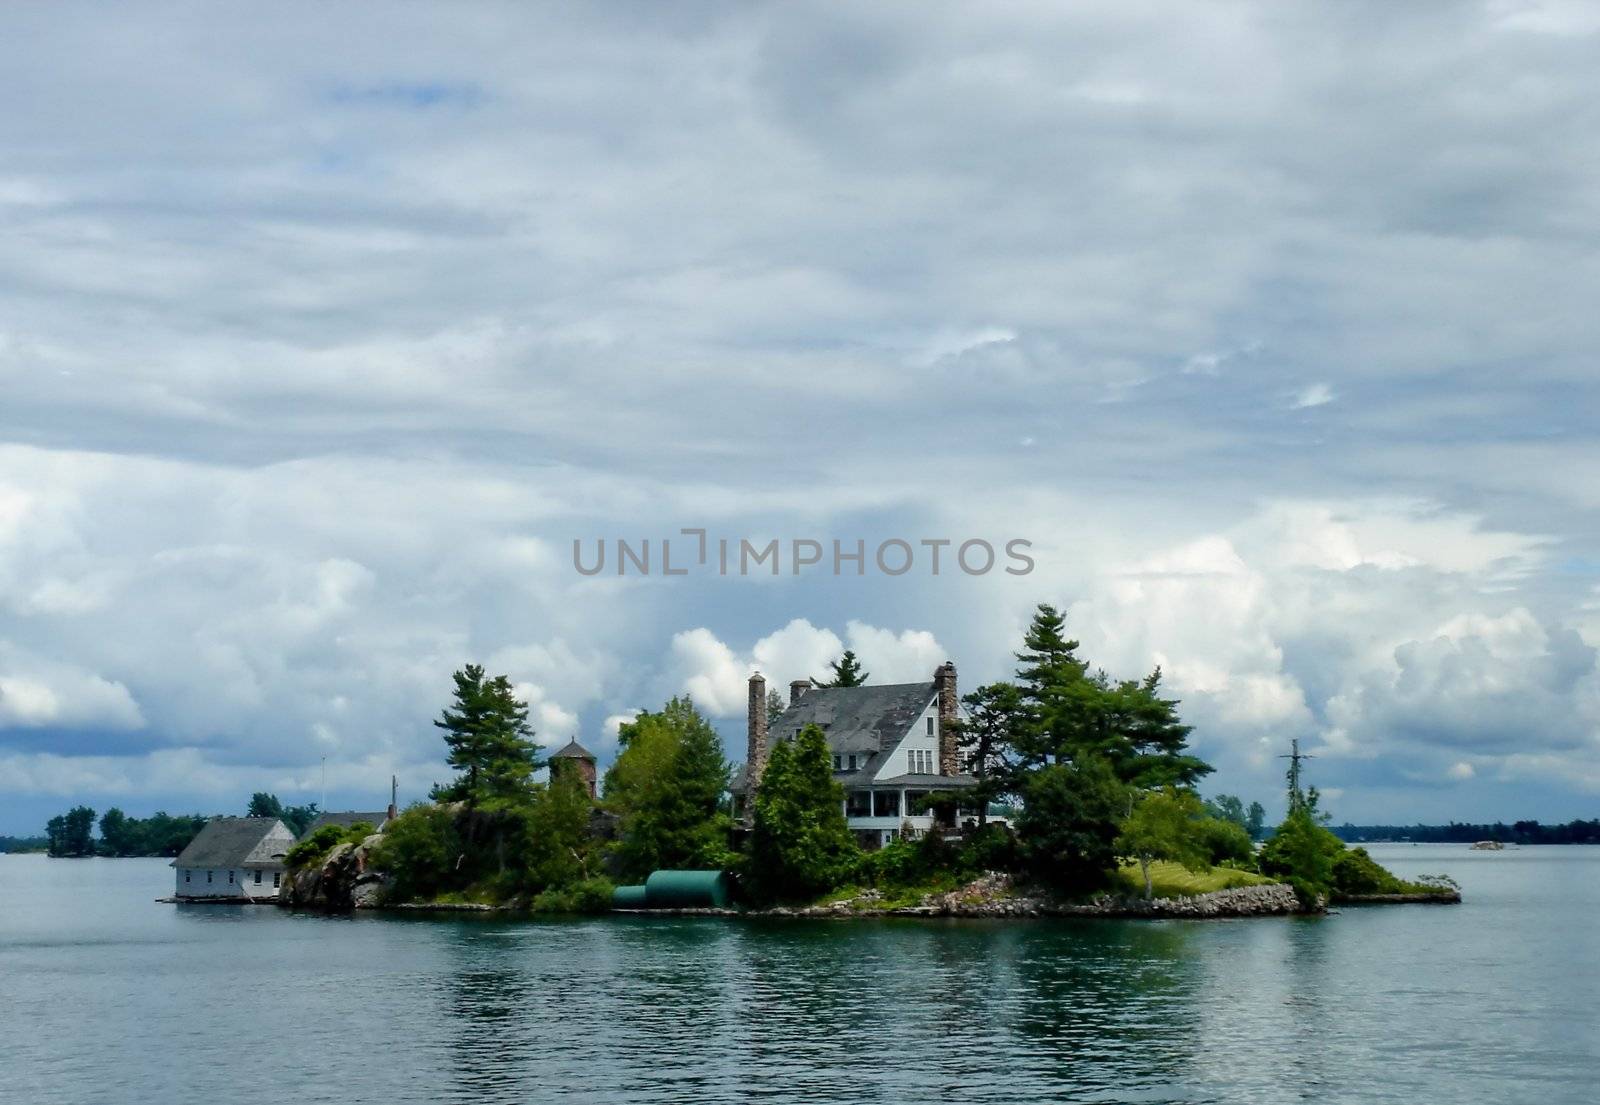 Zavikon island on Ontario Lake with a house in the middle of thousand islands on Ontario lake, Canada, by cloudy weather